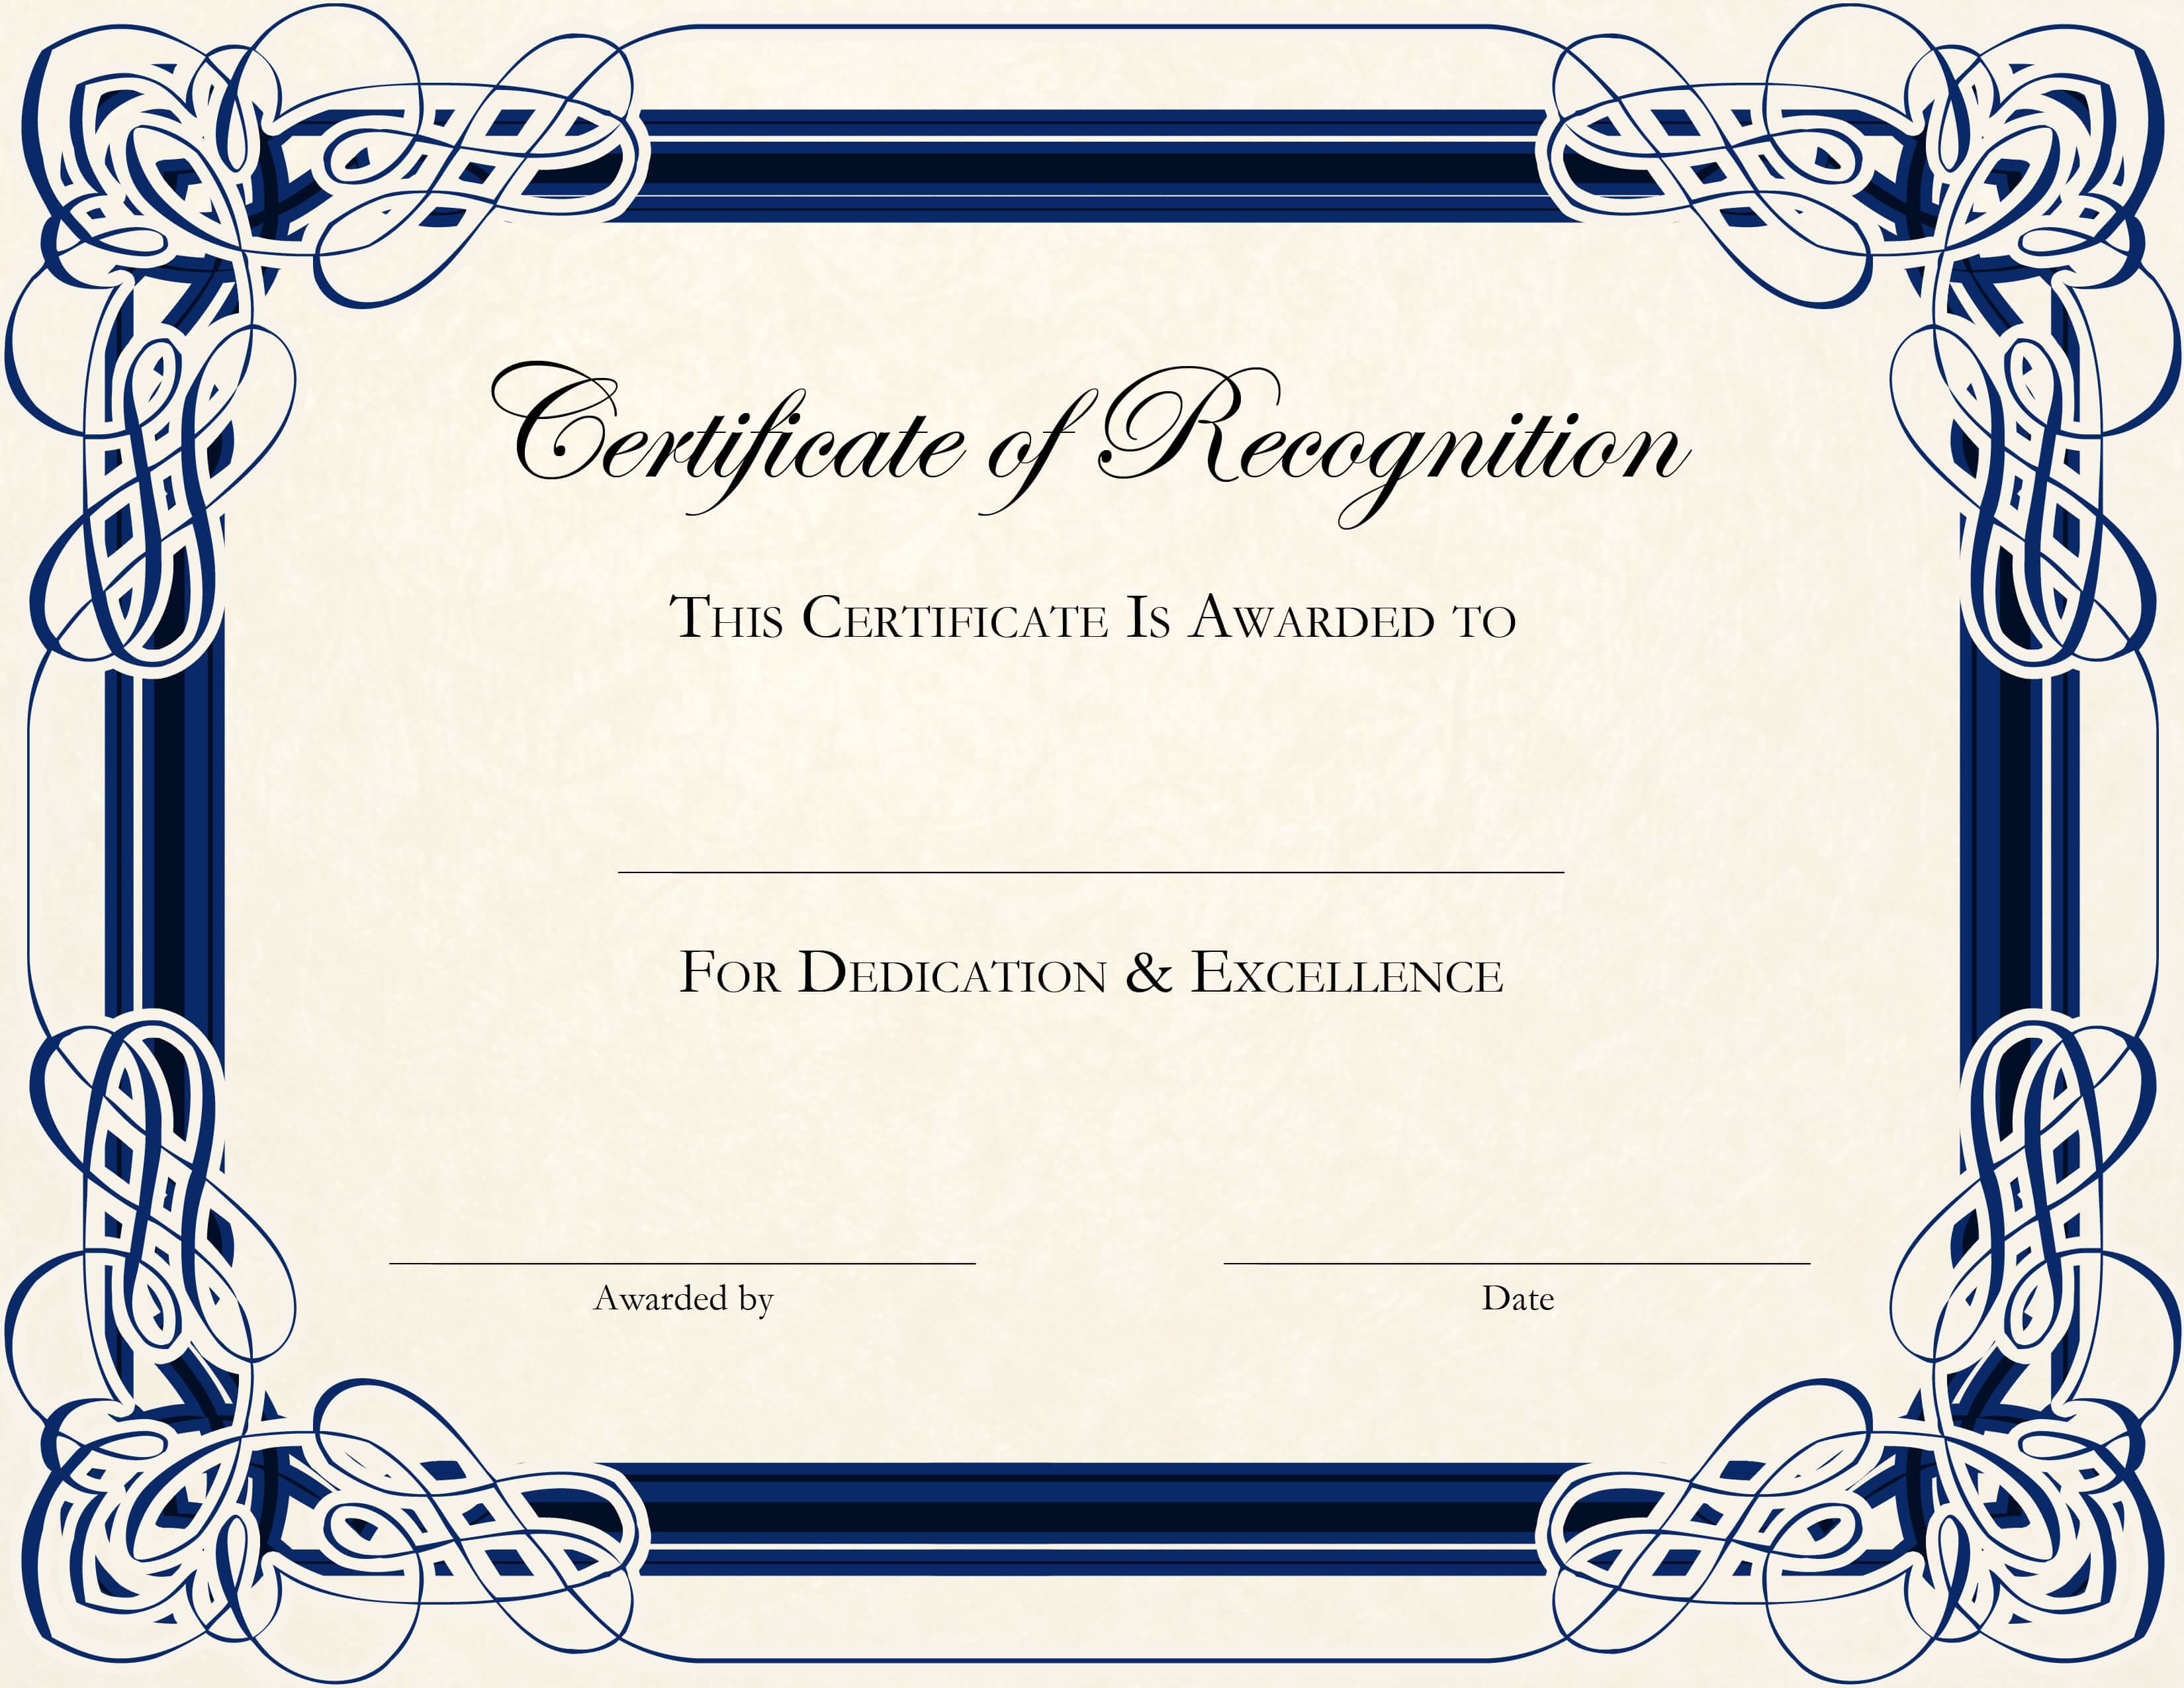 Certificate Template Designs Recognition Docs | Certificate Pertaining To Certificate Of Recognition Word Template